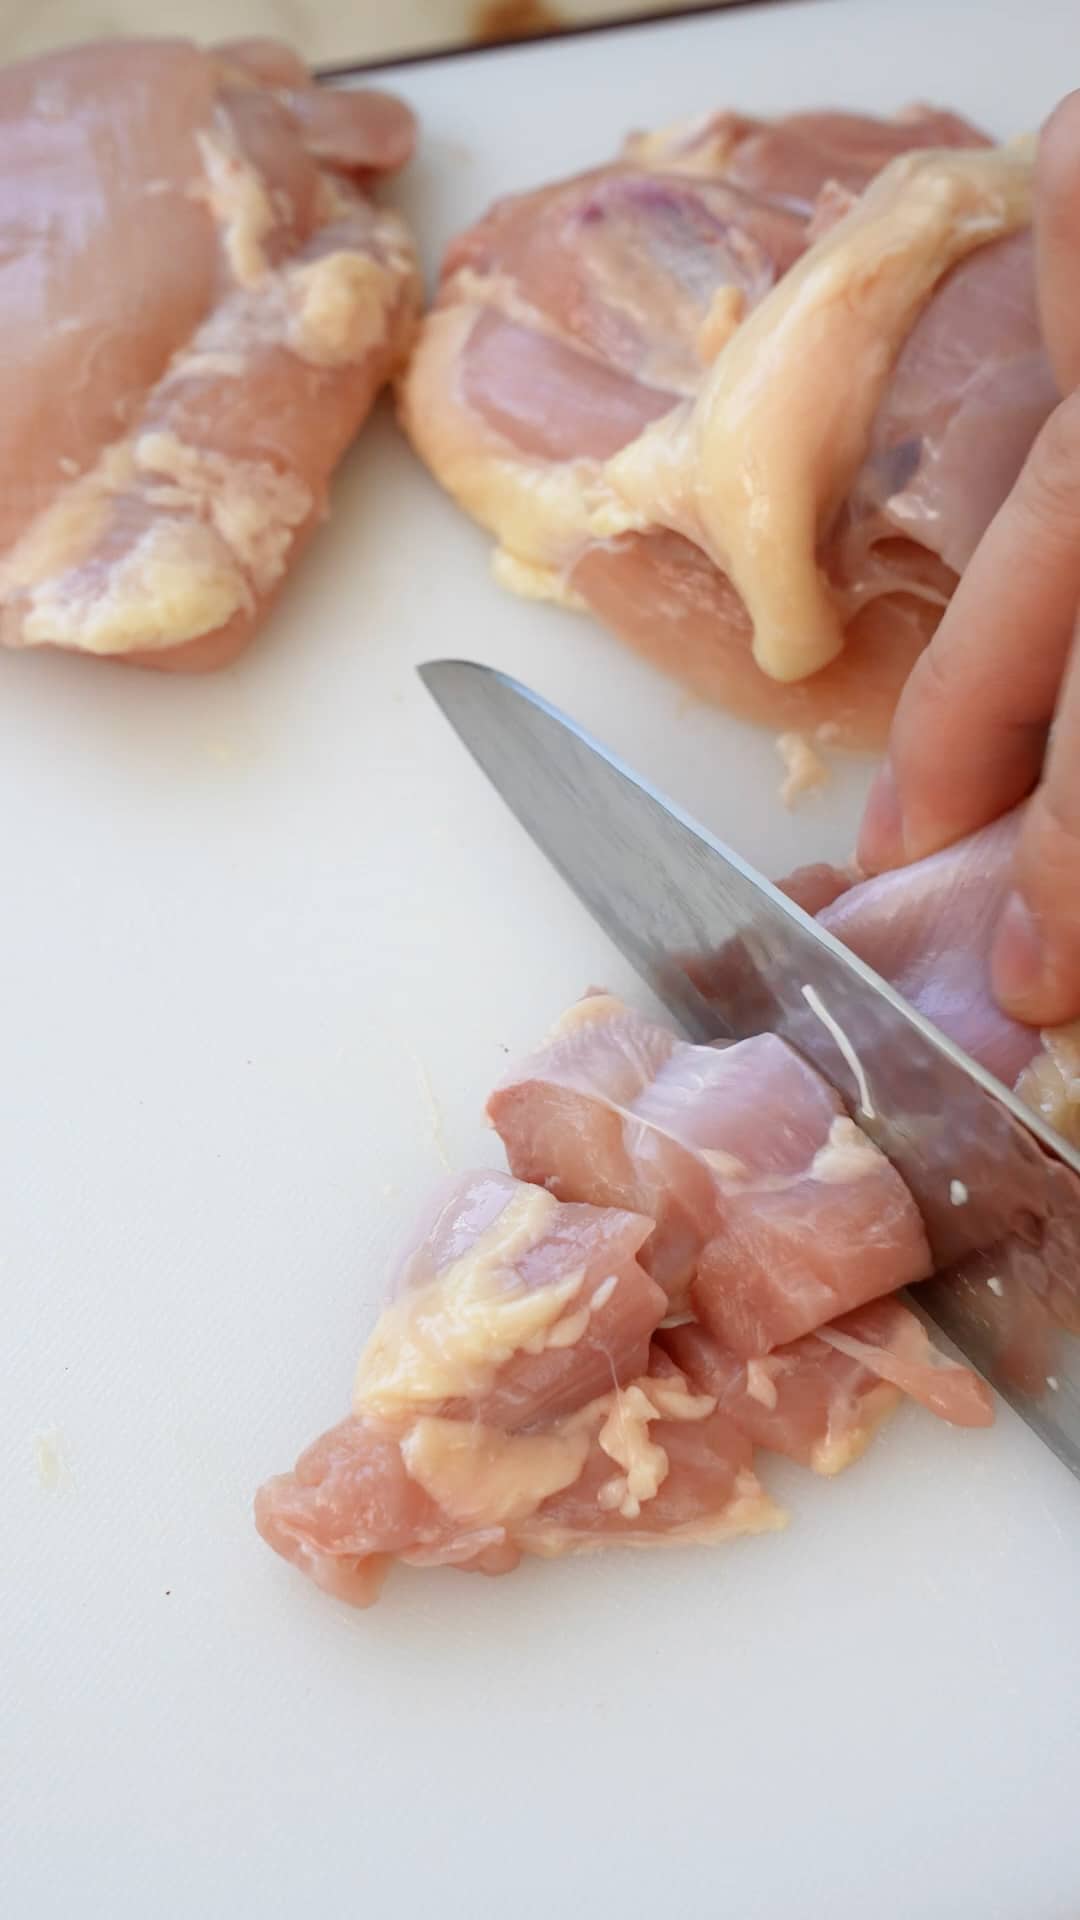 Chicken being cut into pieces with a knife on a cutting board.